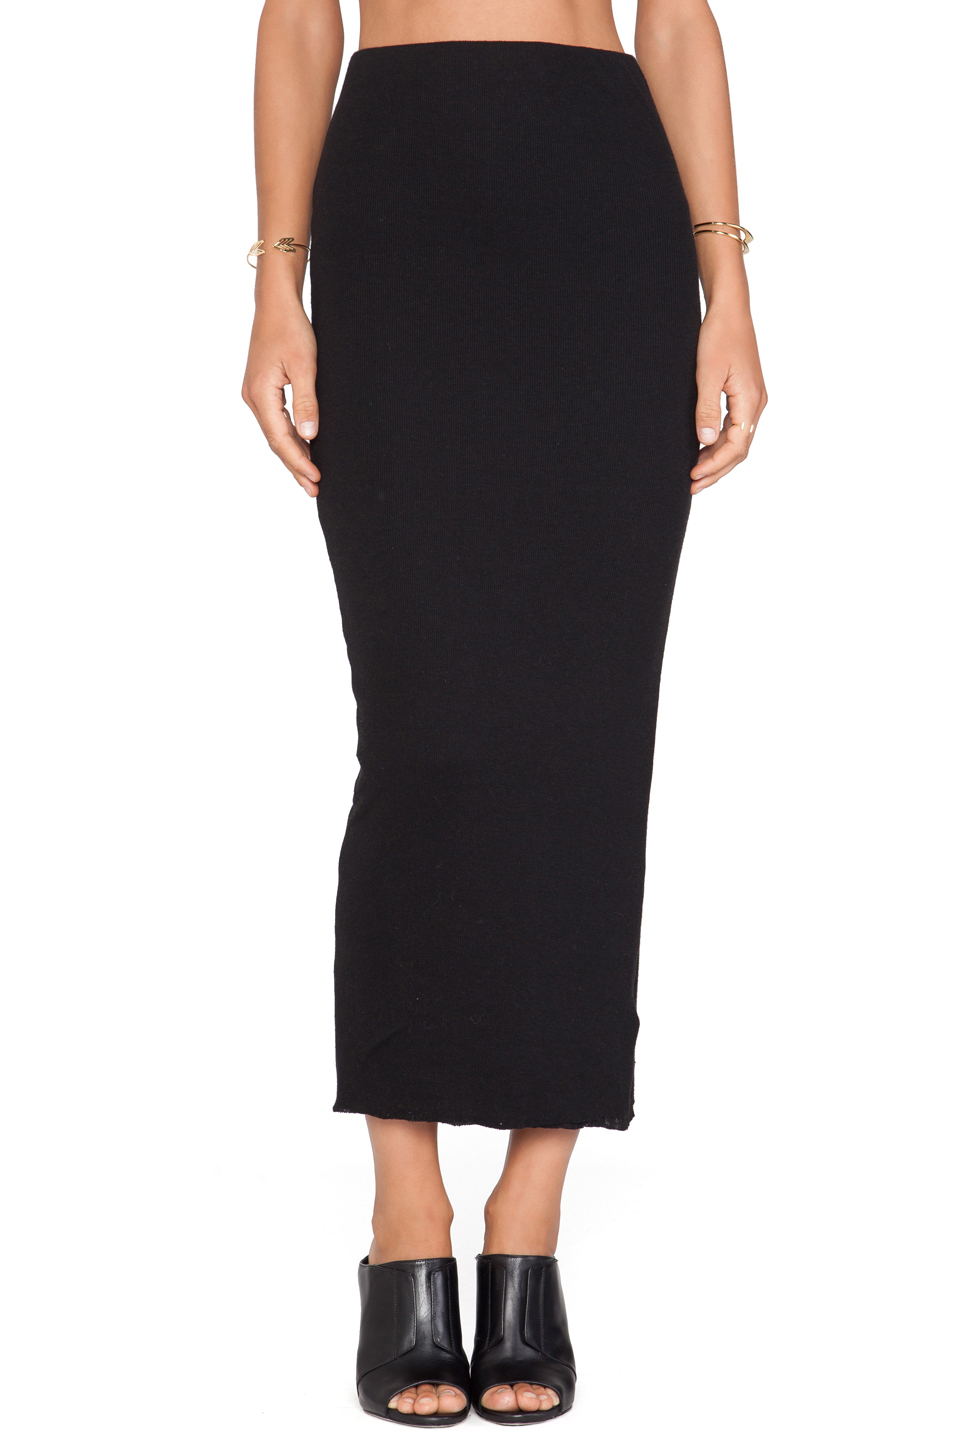 Lyst - James perse Long Cashmere Rib Skirt in Black